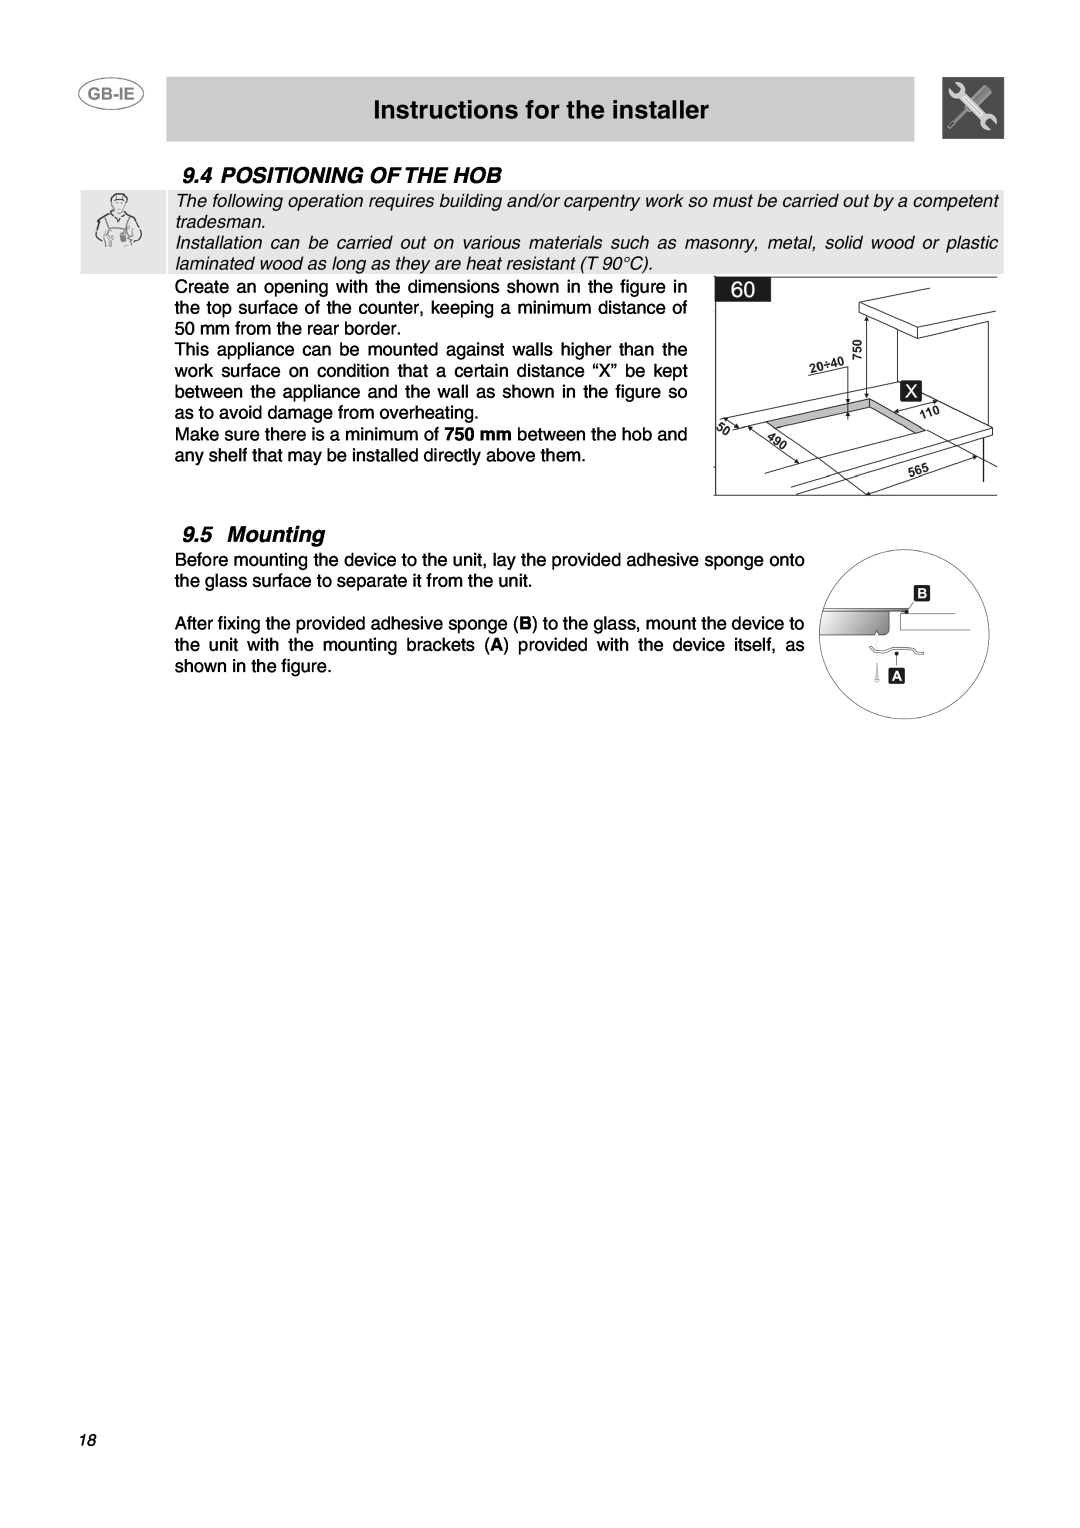 Smeg SE60X manual Positioning Of The Hob, Mounting, Instructions for the installer 